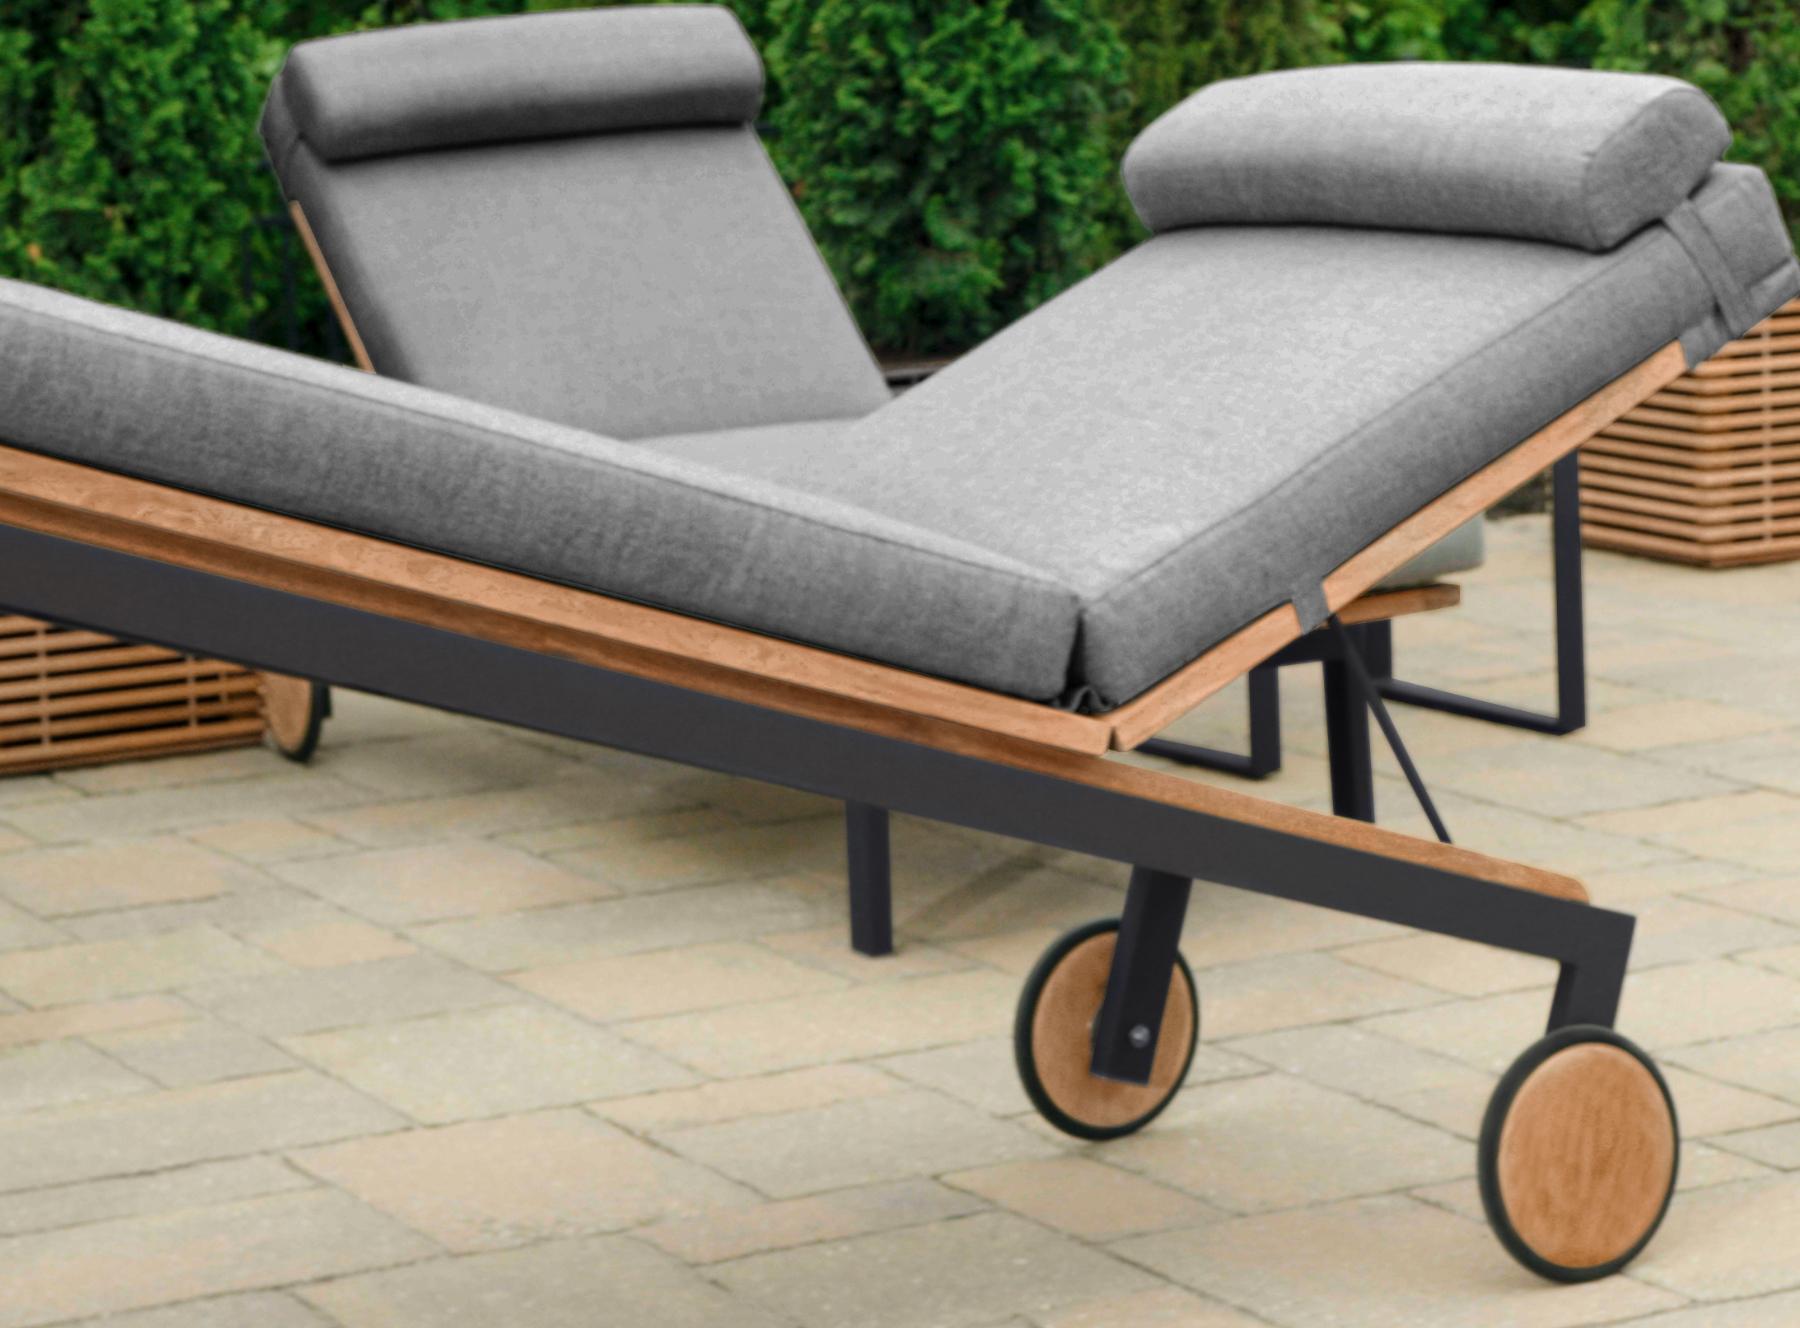 Chaise Lounges Chairs - Move it where you need it